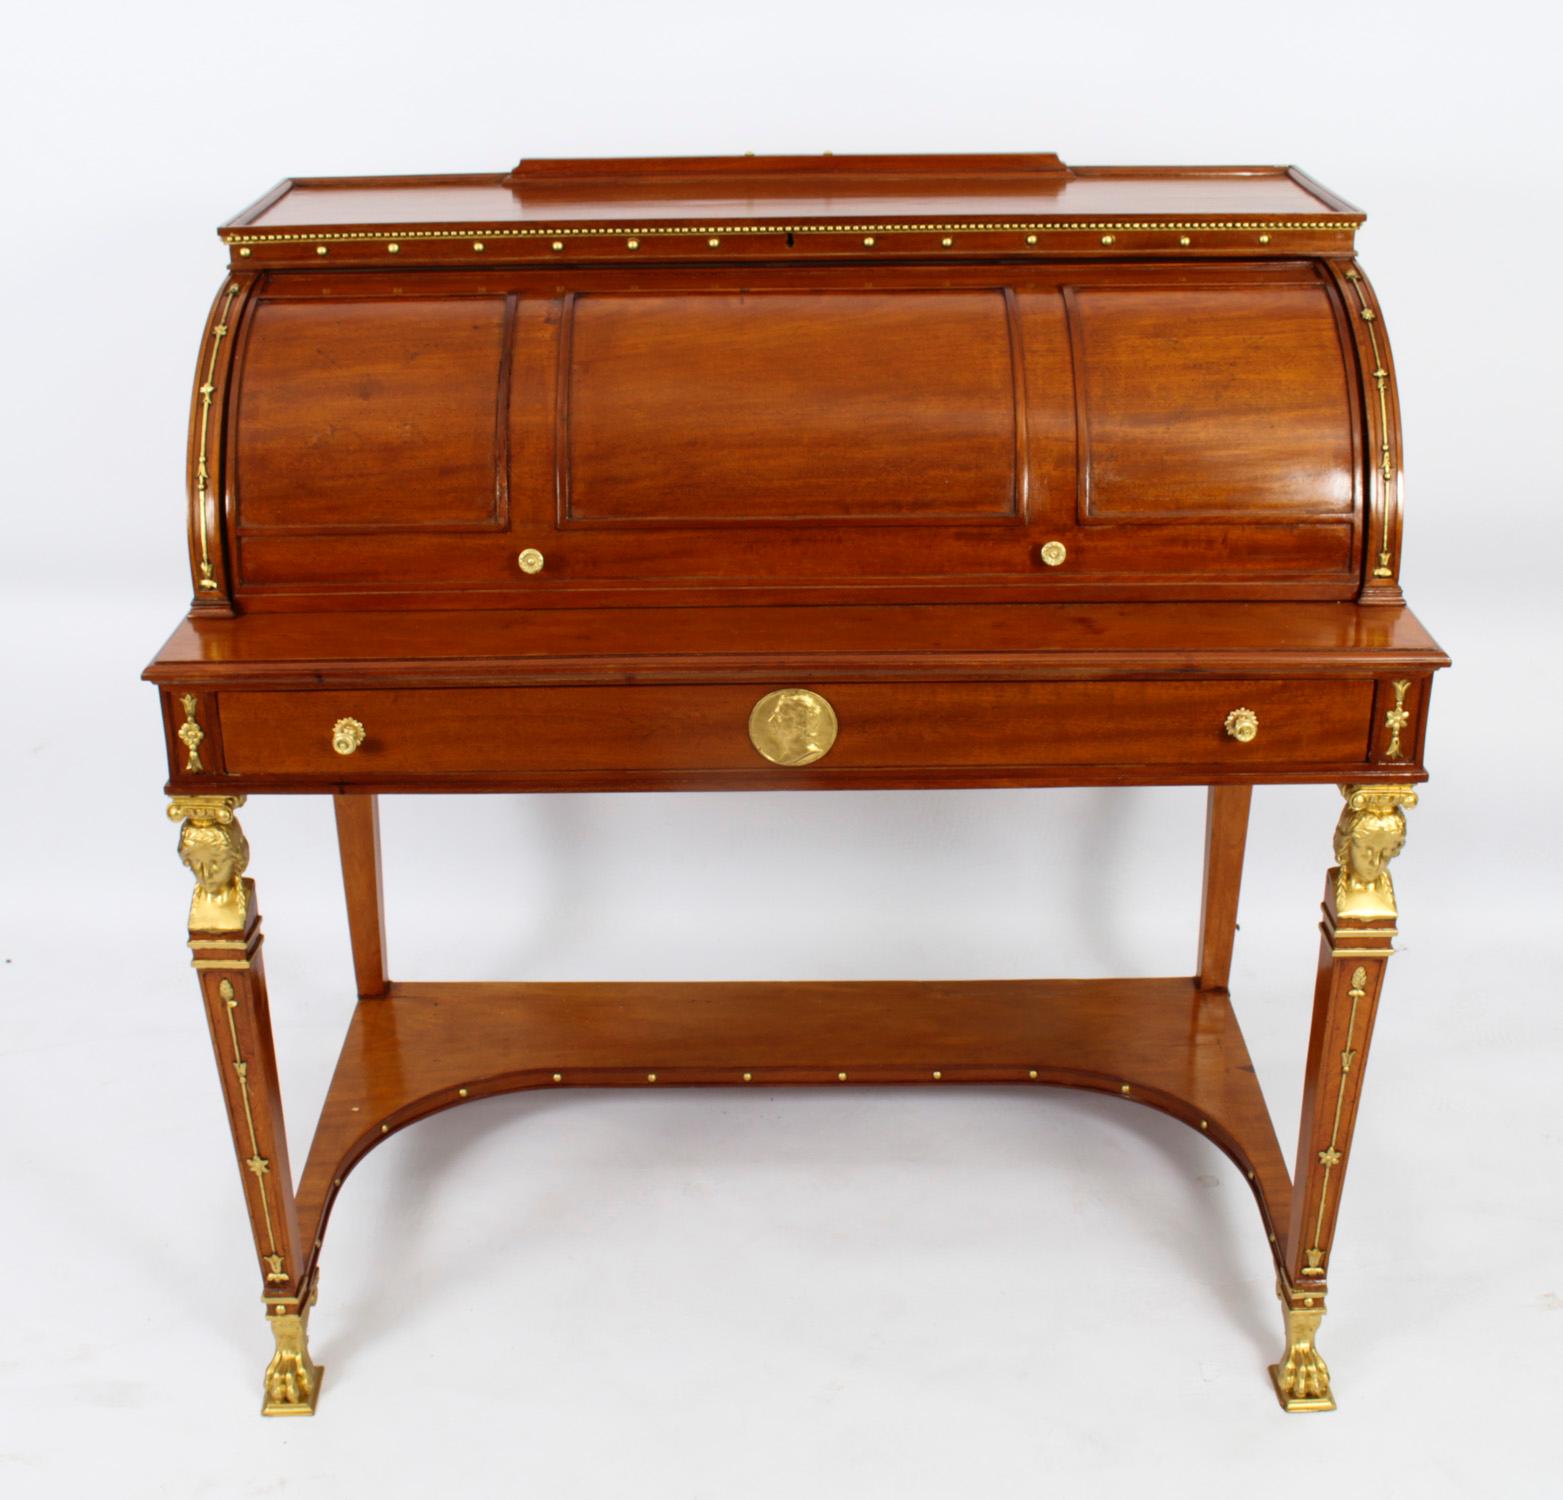 An Empire Revival mahogany and parcel gilt cylinder bureau, Circa 1880 in date.

The panelled roll top enclosing a green inset leather writing surface and an arrangement of drawers and pigeon holes, above single frieze drawer.

It is stands on